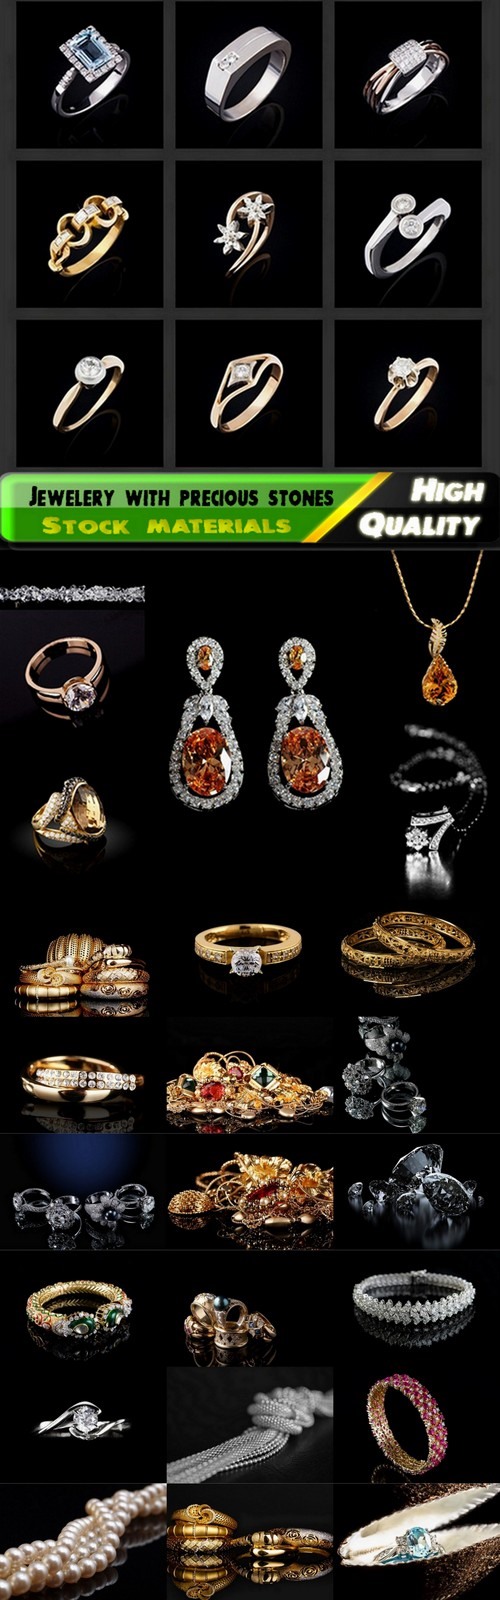 Jewelery with precious stones isolated on black - 25 HQ Jpg